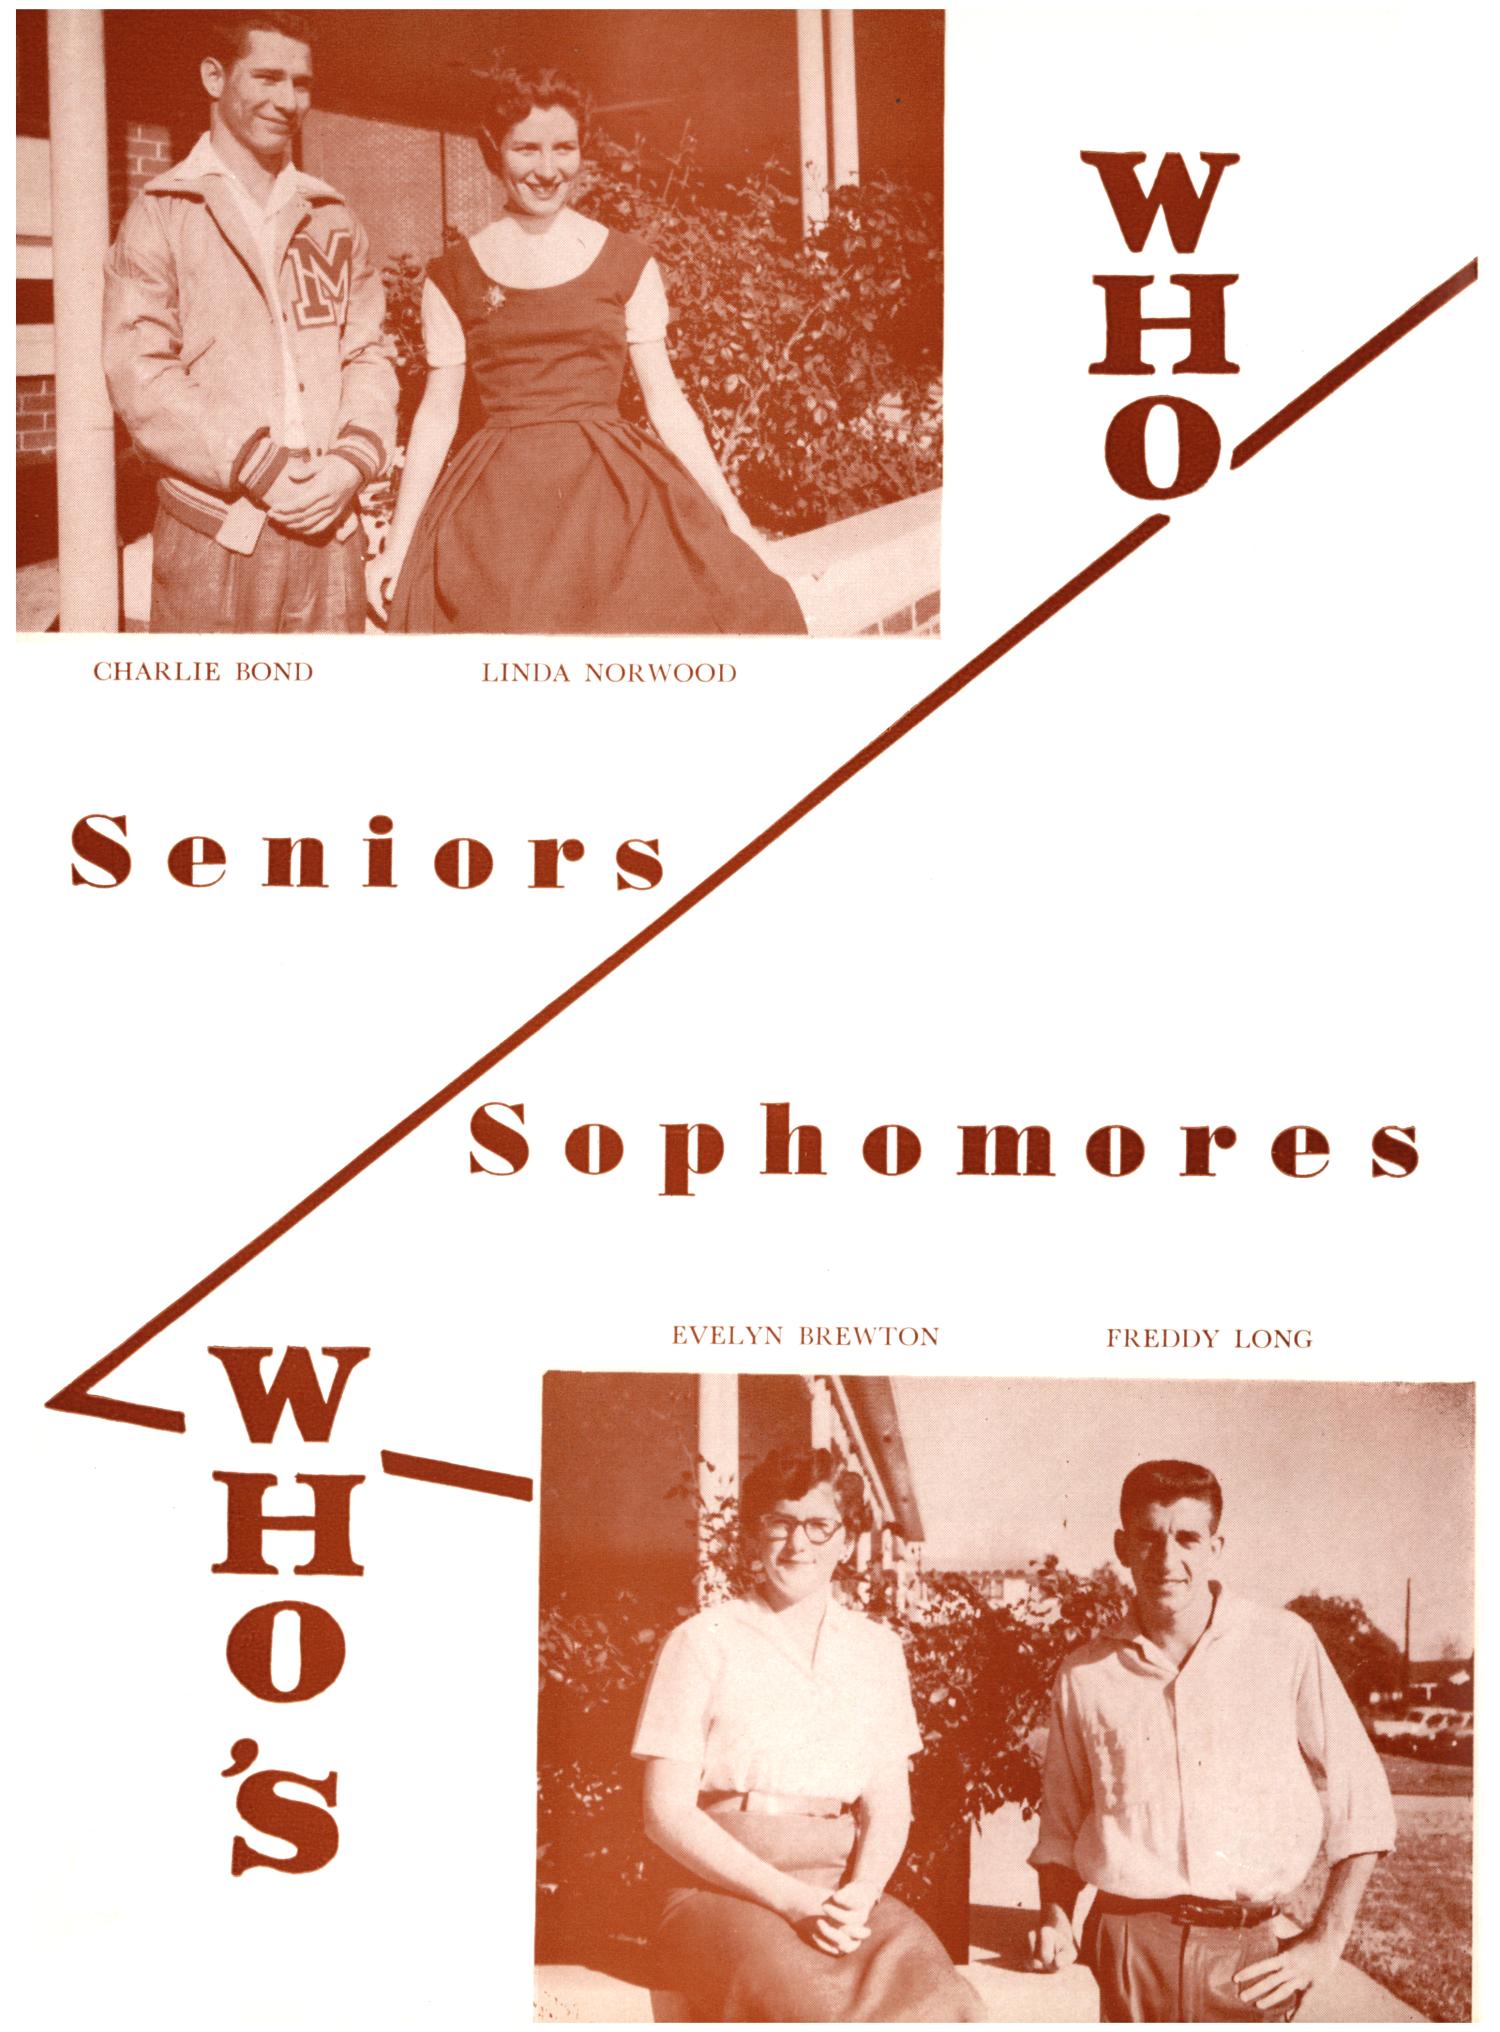 The Burro, Yearbook of Mineral Wells High School, 1955
                                                
                                                    86
                                                